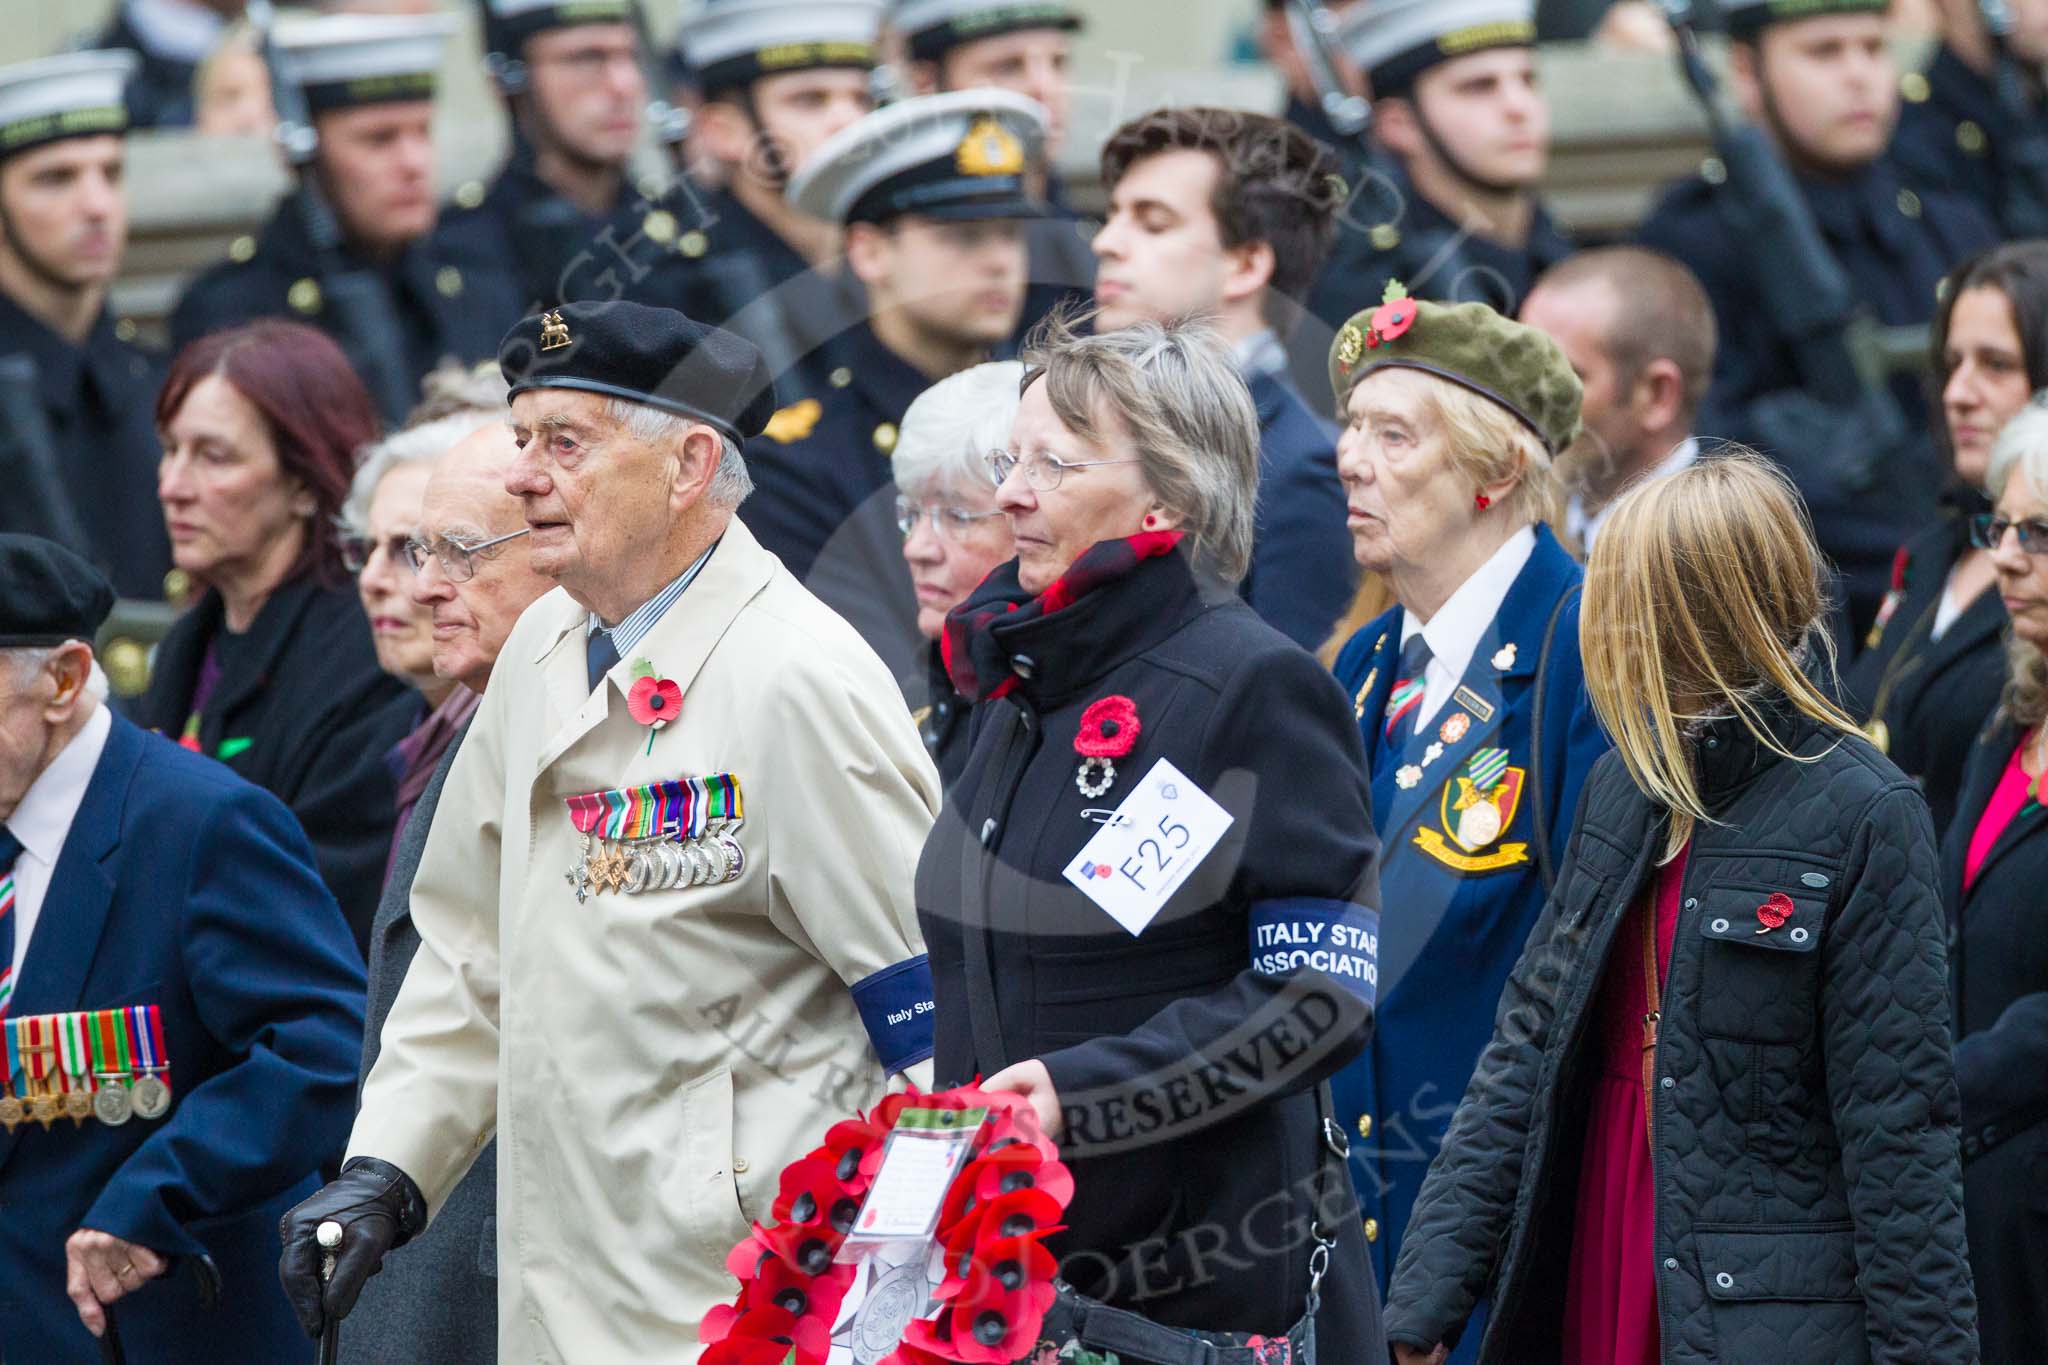 Remembrance Sunday at the Cenotaph 2015: Group F25, Italy Star Association 1943-1945.
Cenotaph, Whitehall, London SW1,
London,
Greater London,
United Kingdom,
on 08 November 2015 at 12:07, image #1136